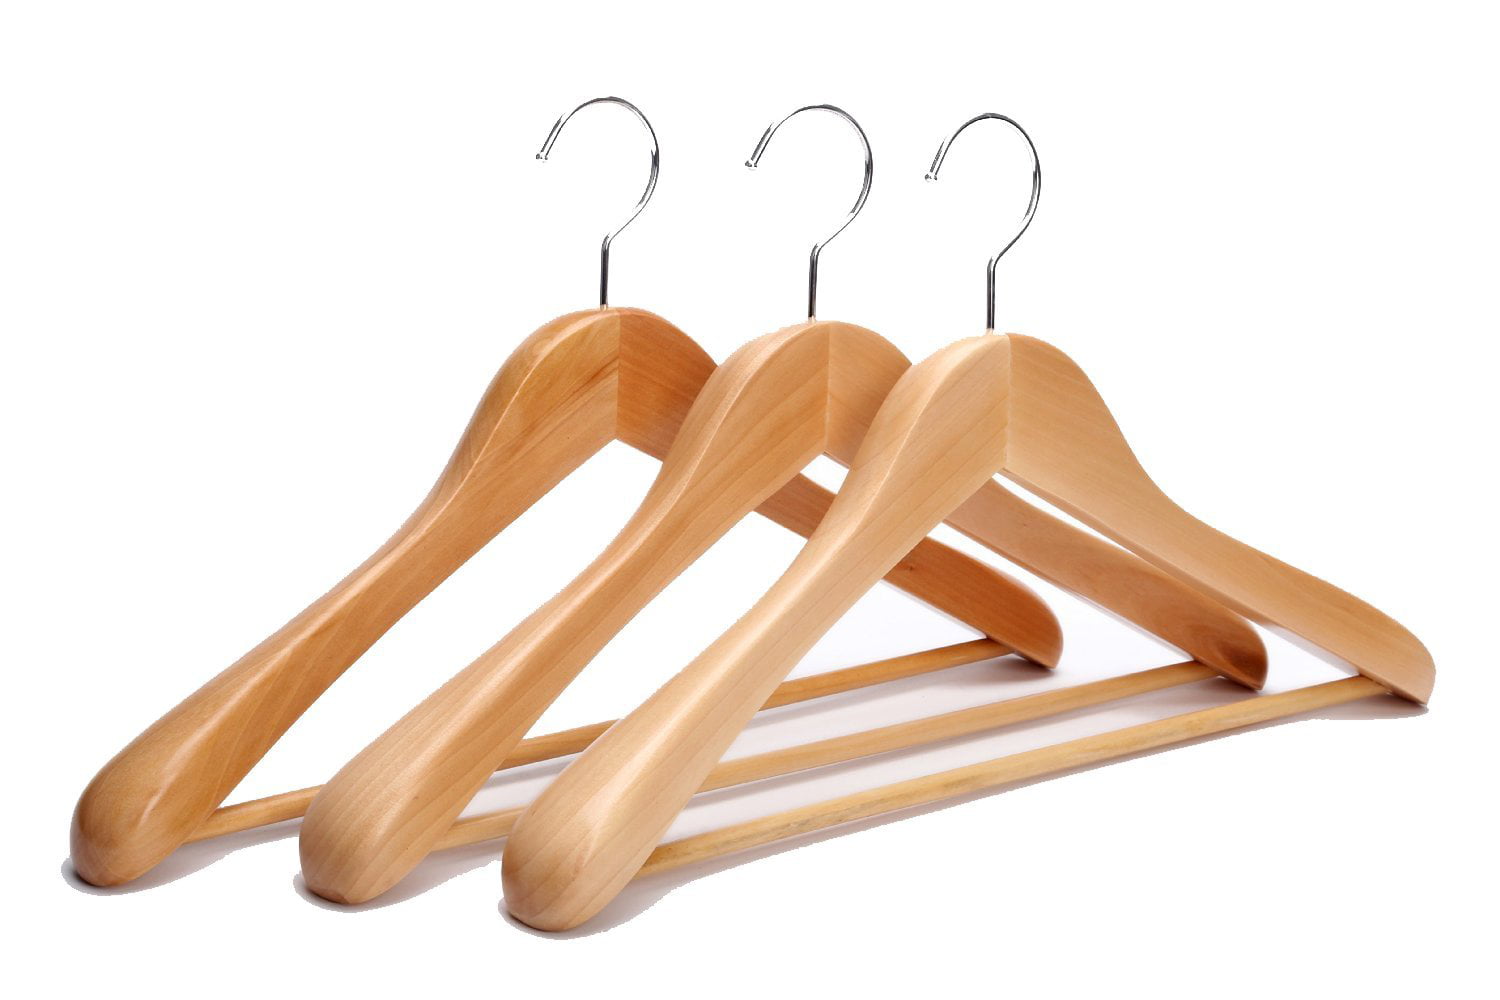 Wooden Suit Hangers Extra Wide Shoulder with Non Slip Bar Walnut Finish 3 Pack 